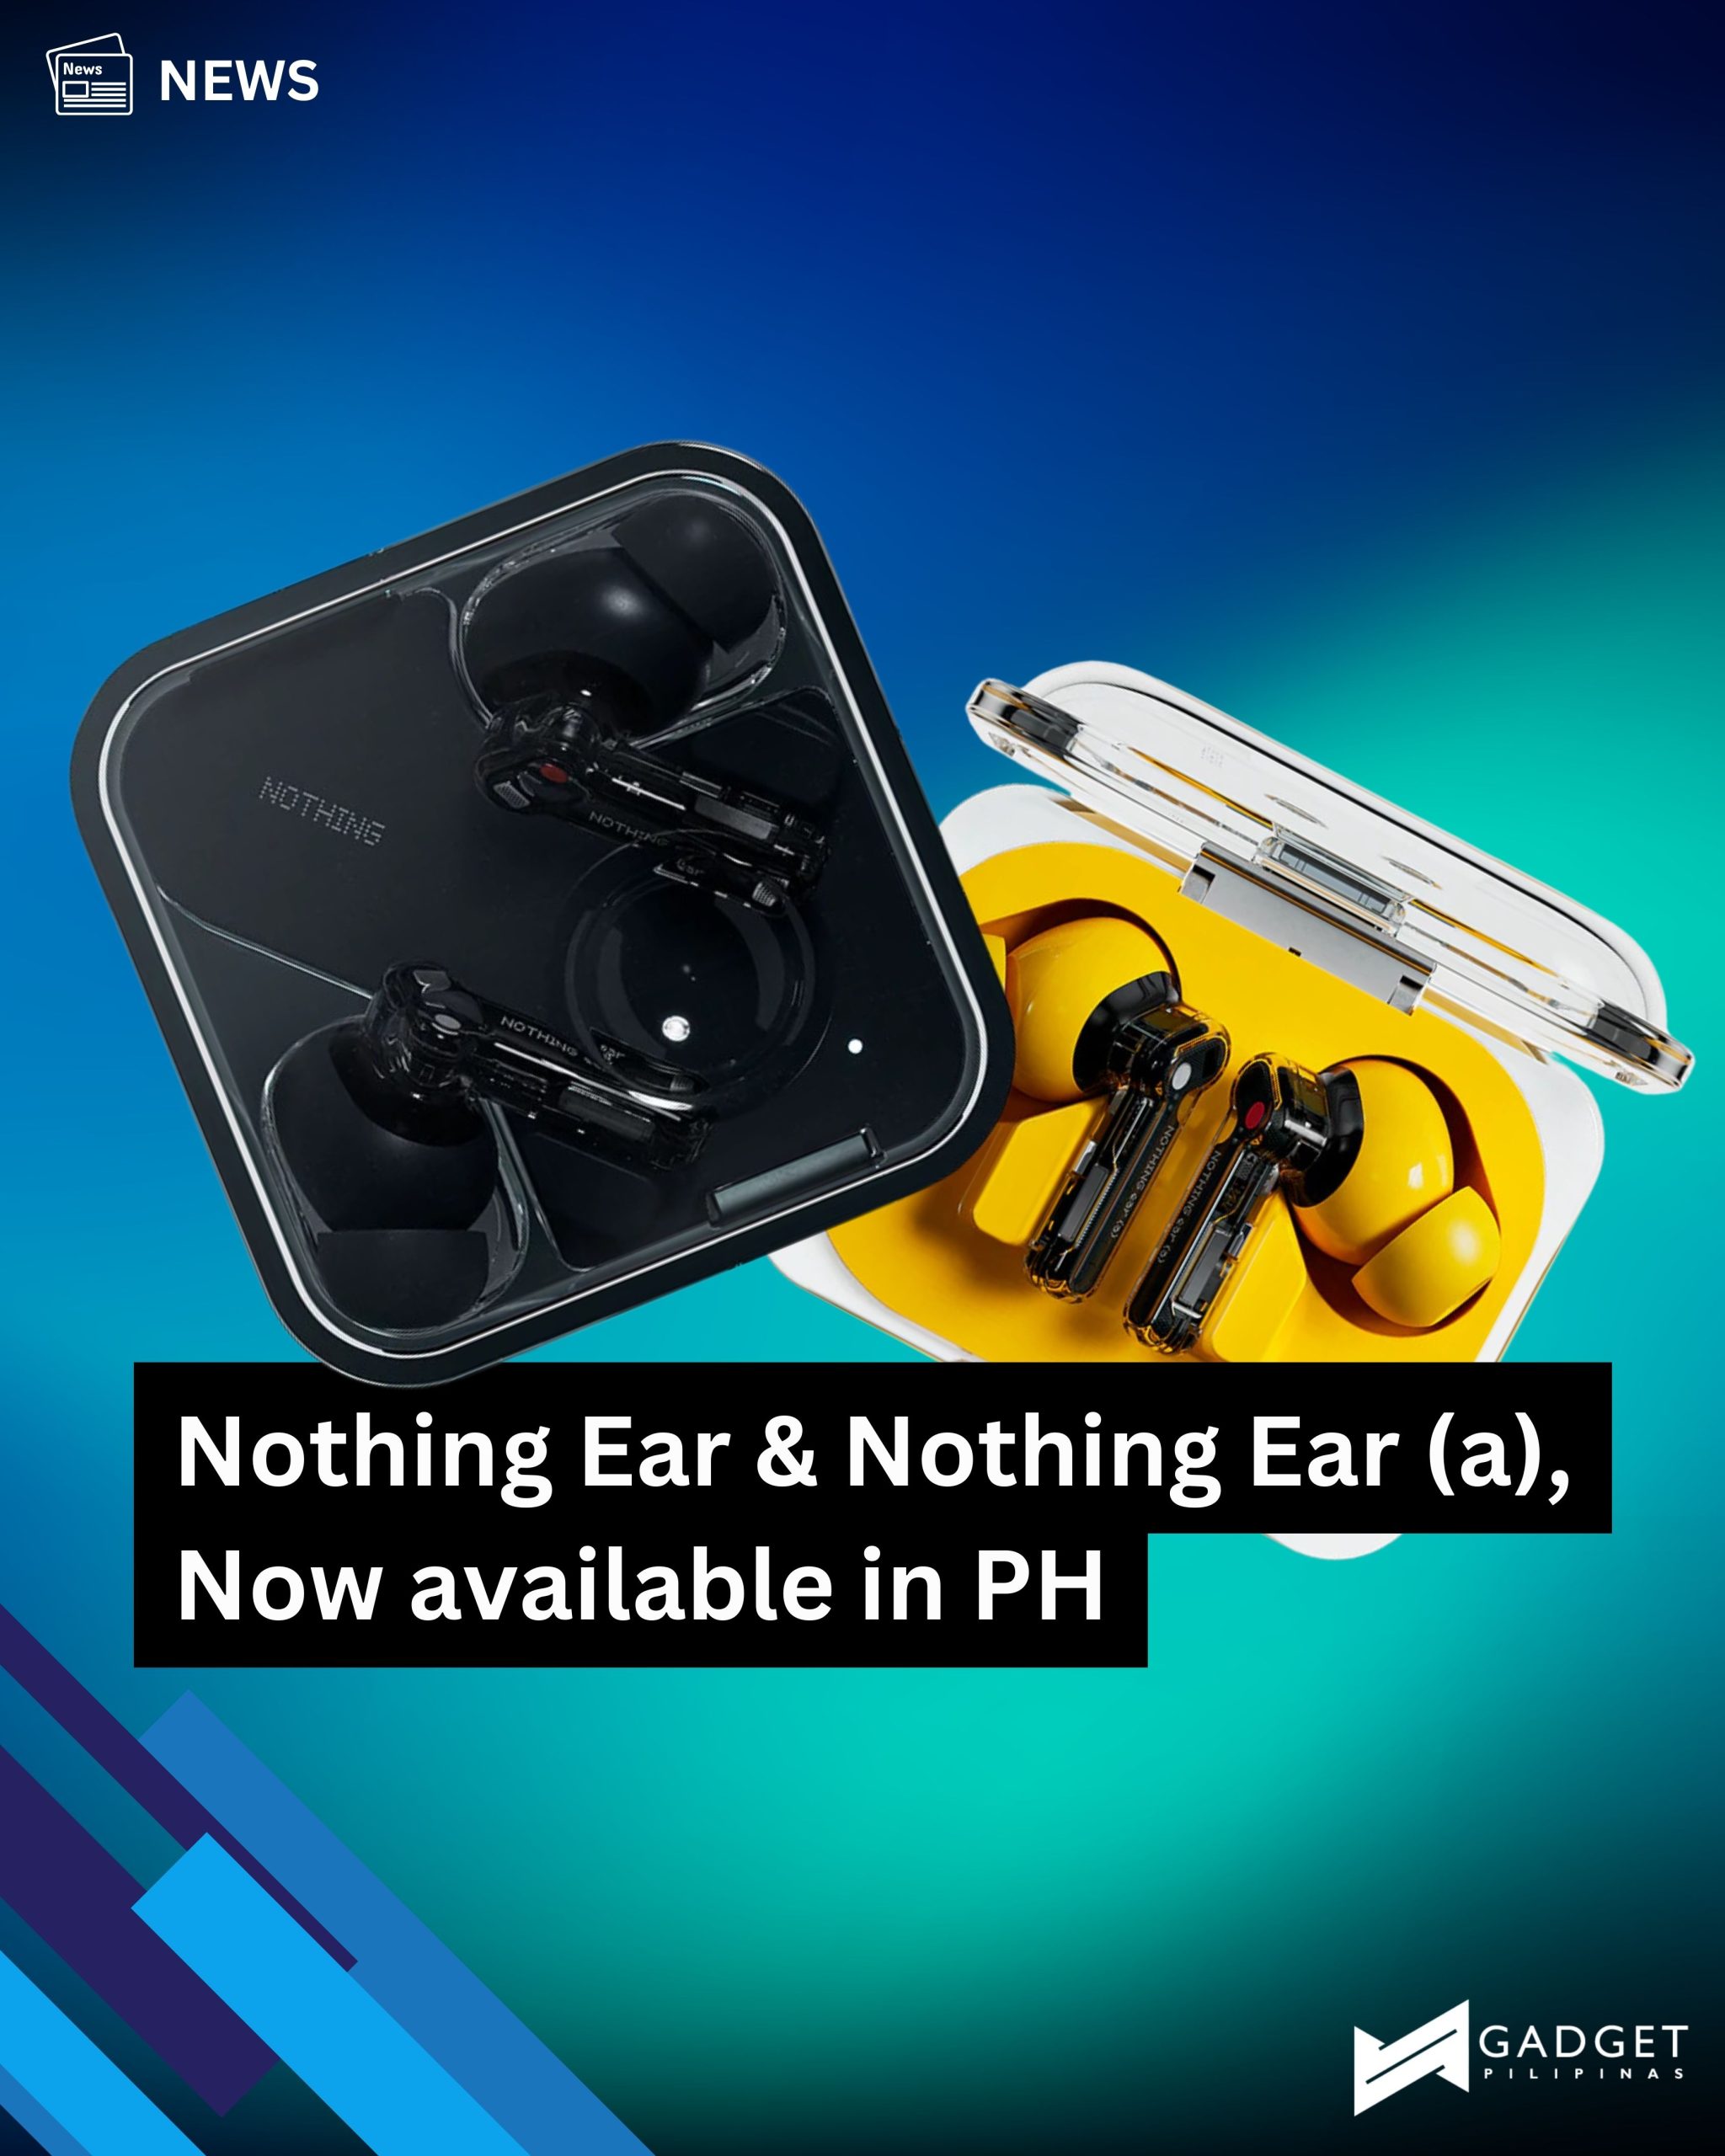 Nothing Ear and Nothing Ear (a) Officially Arrive in the Philippines through Digital Walker